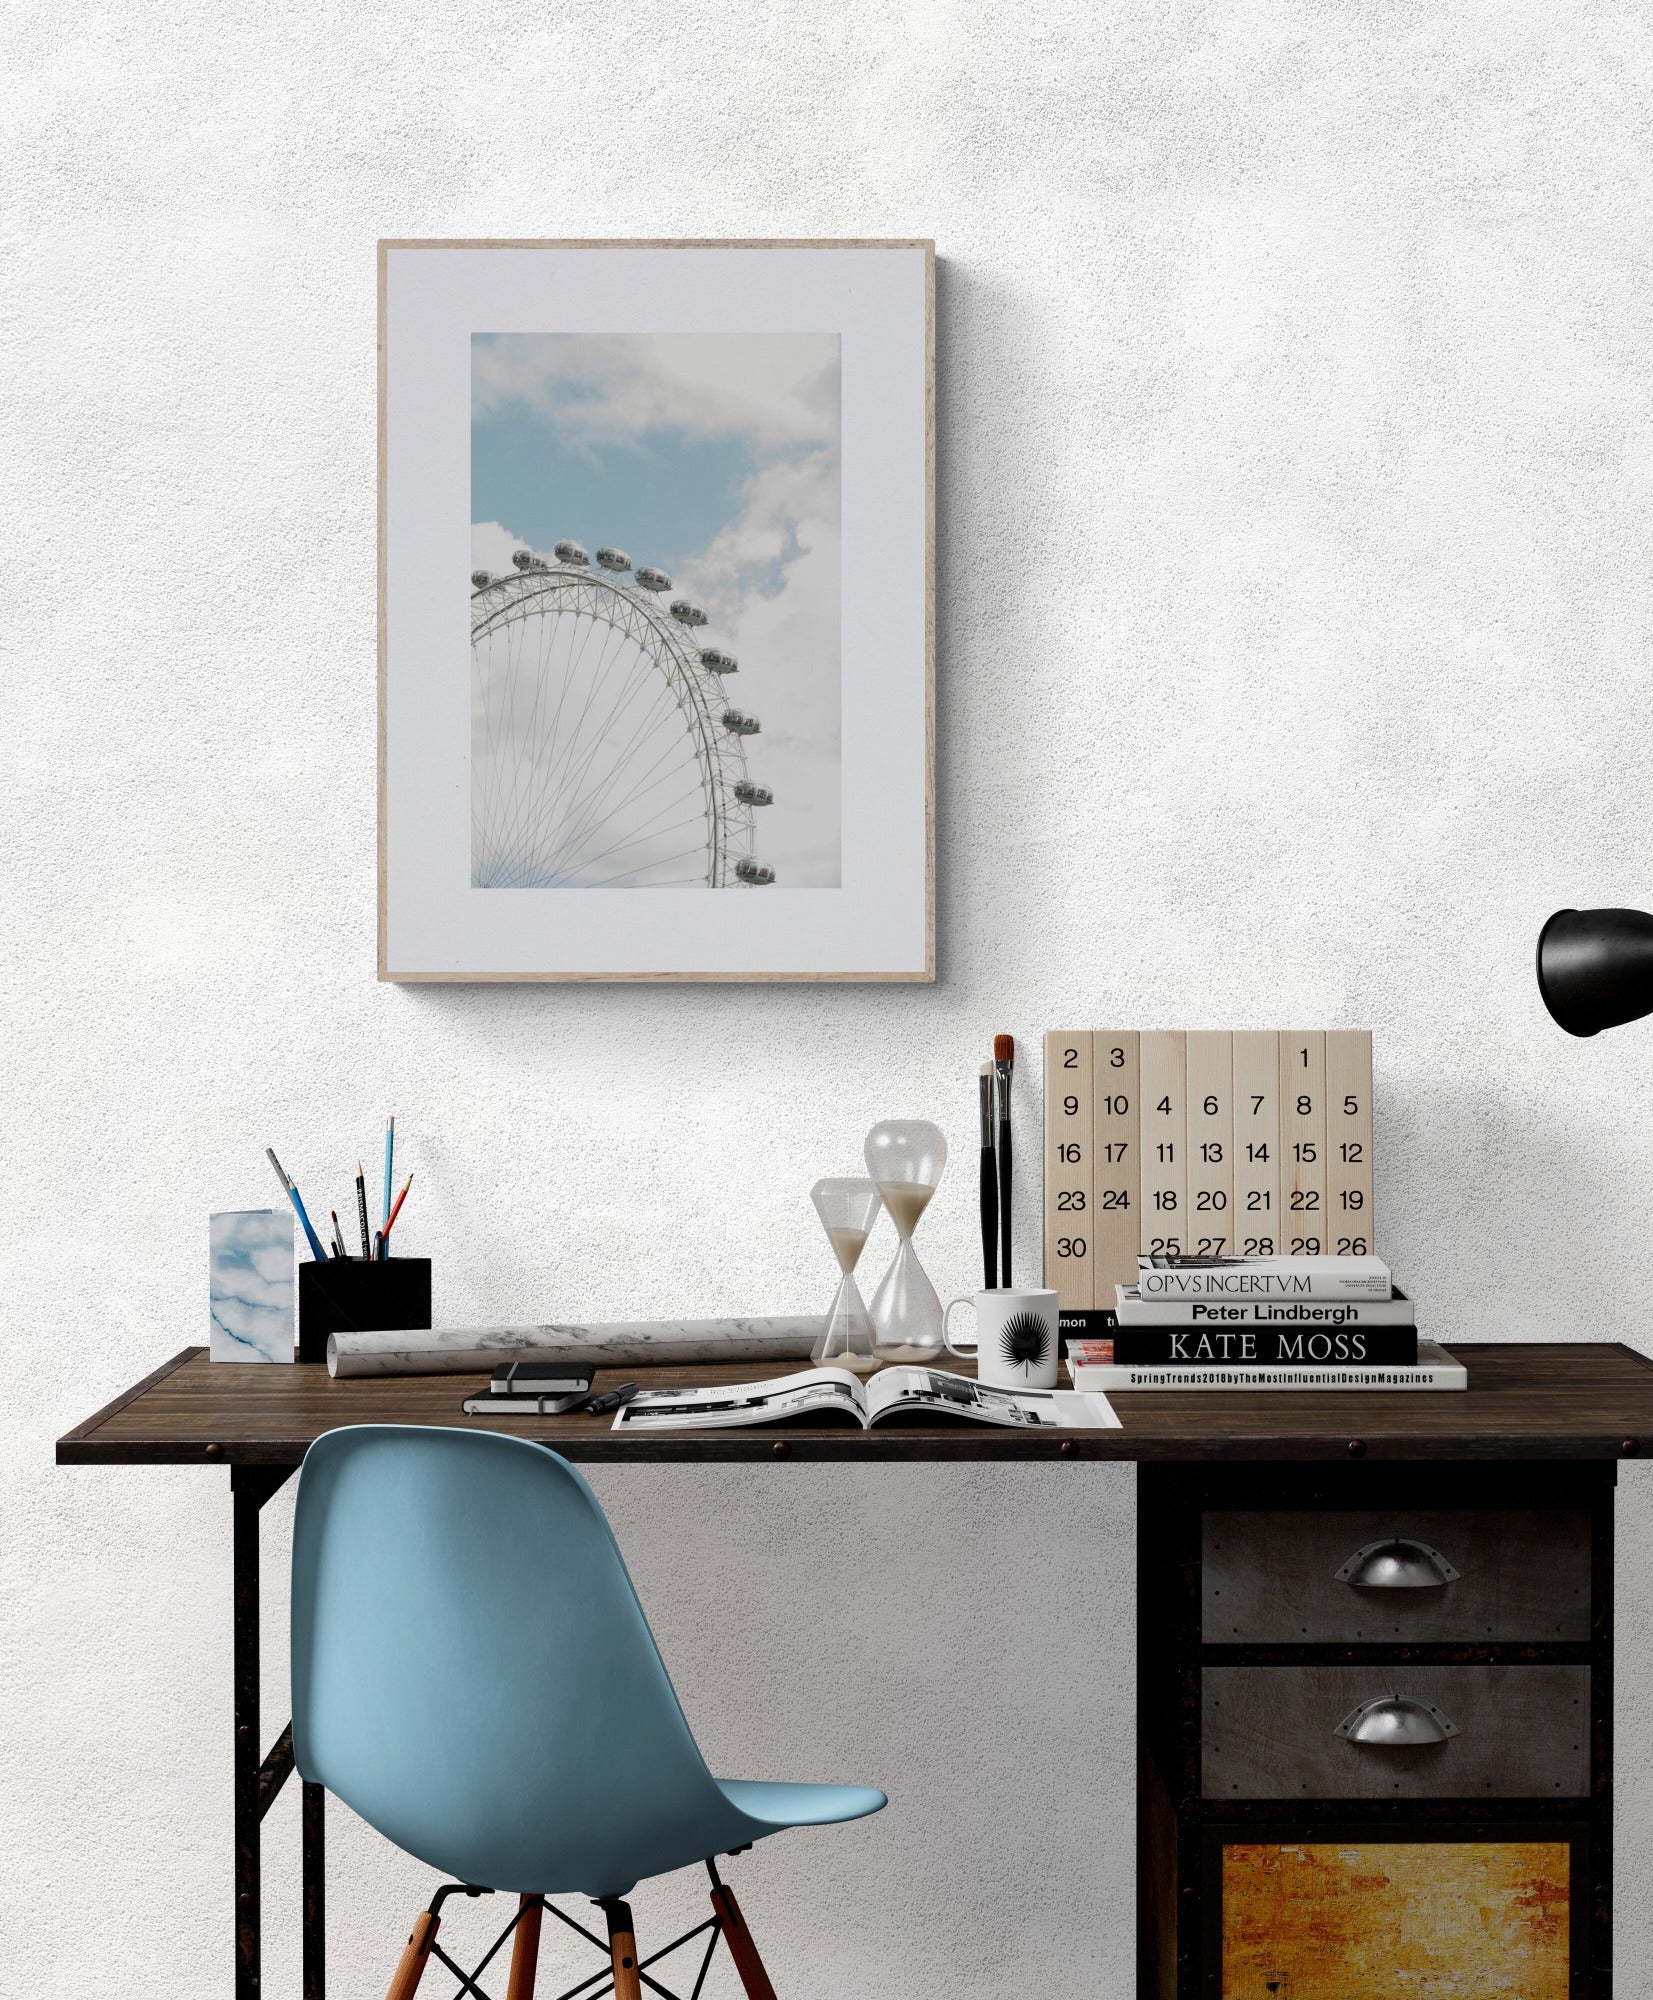 Photograph of London Eye attraction as wall art in a home office